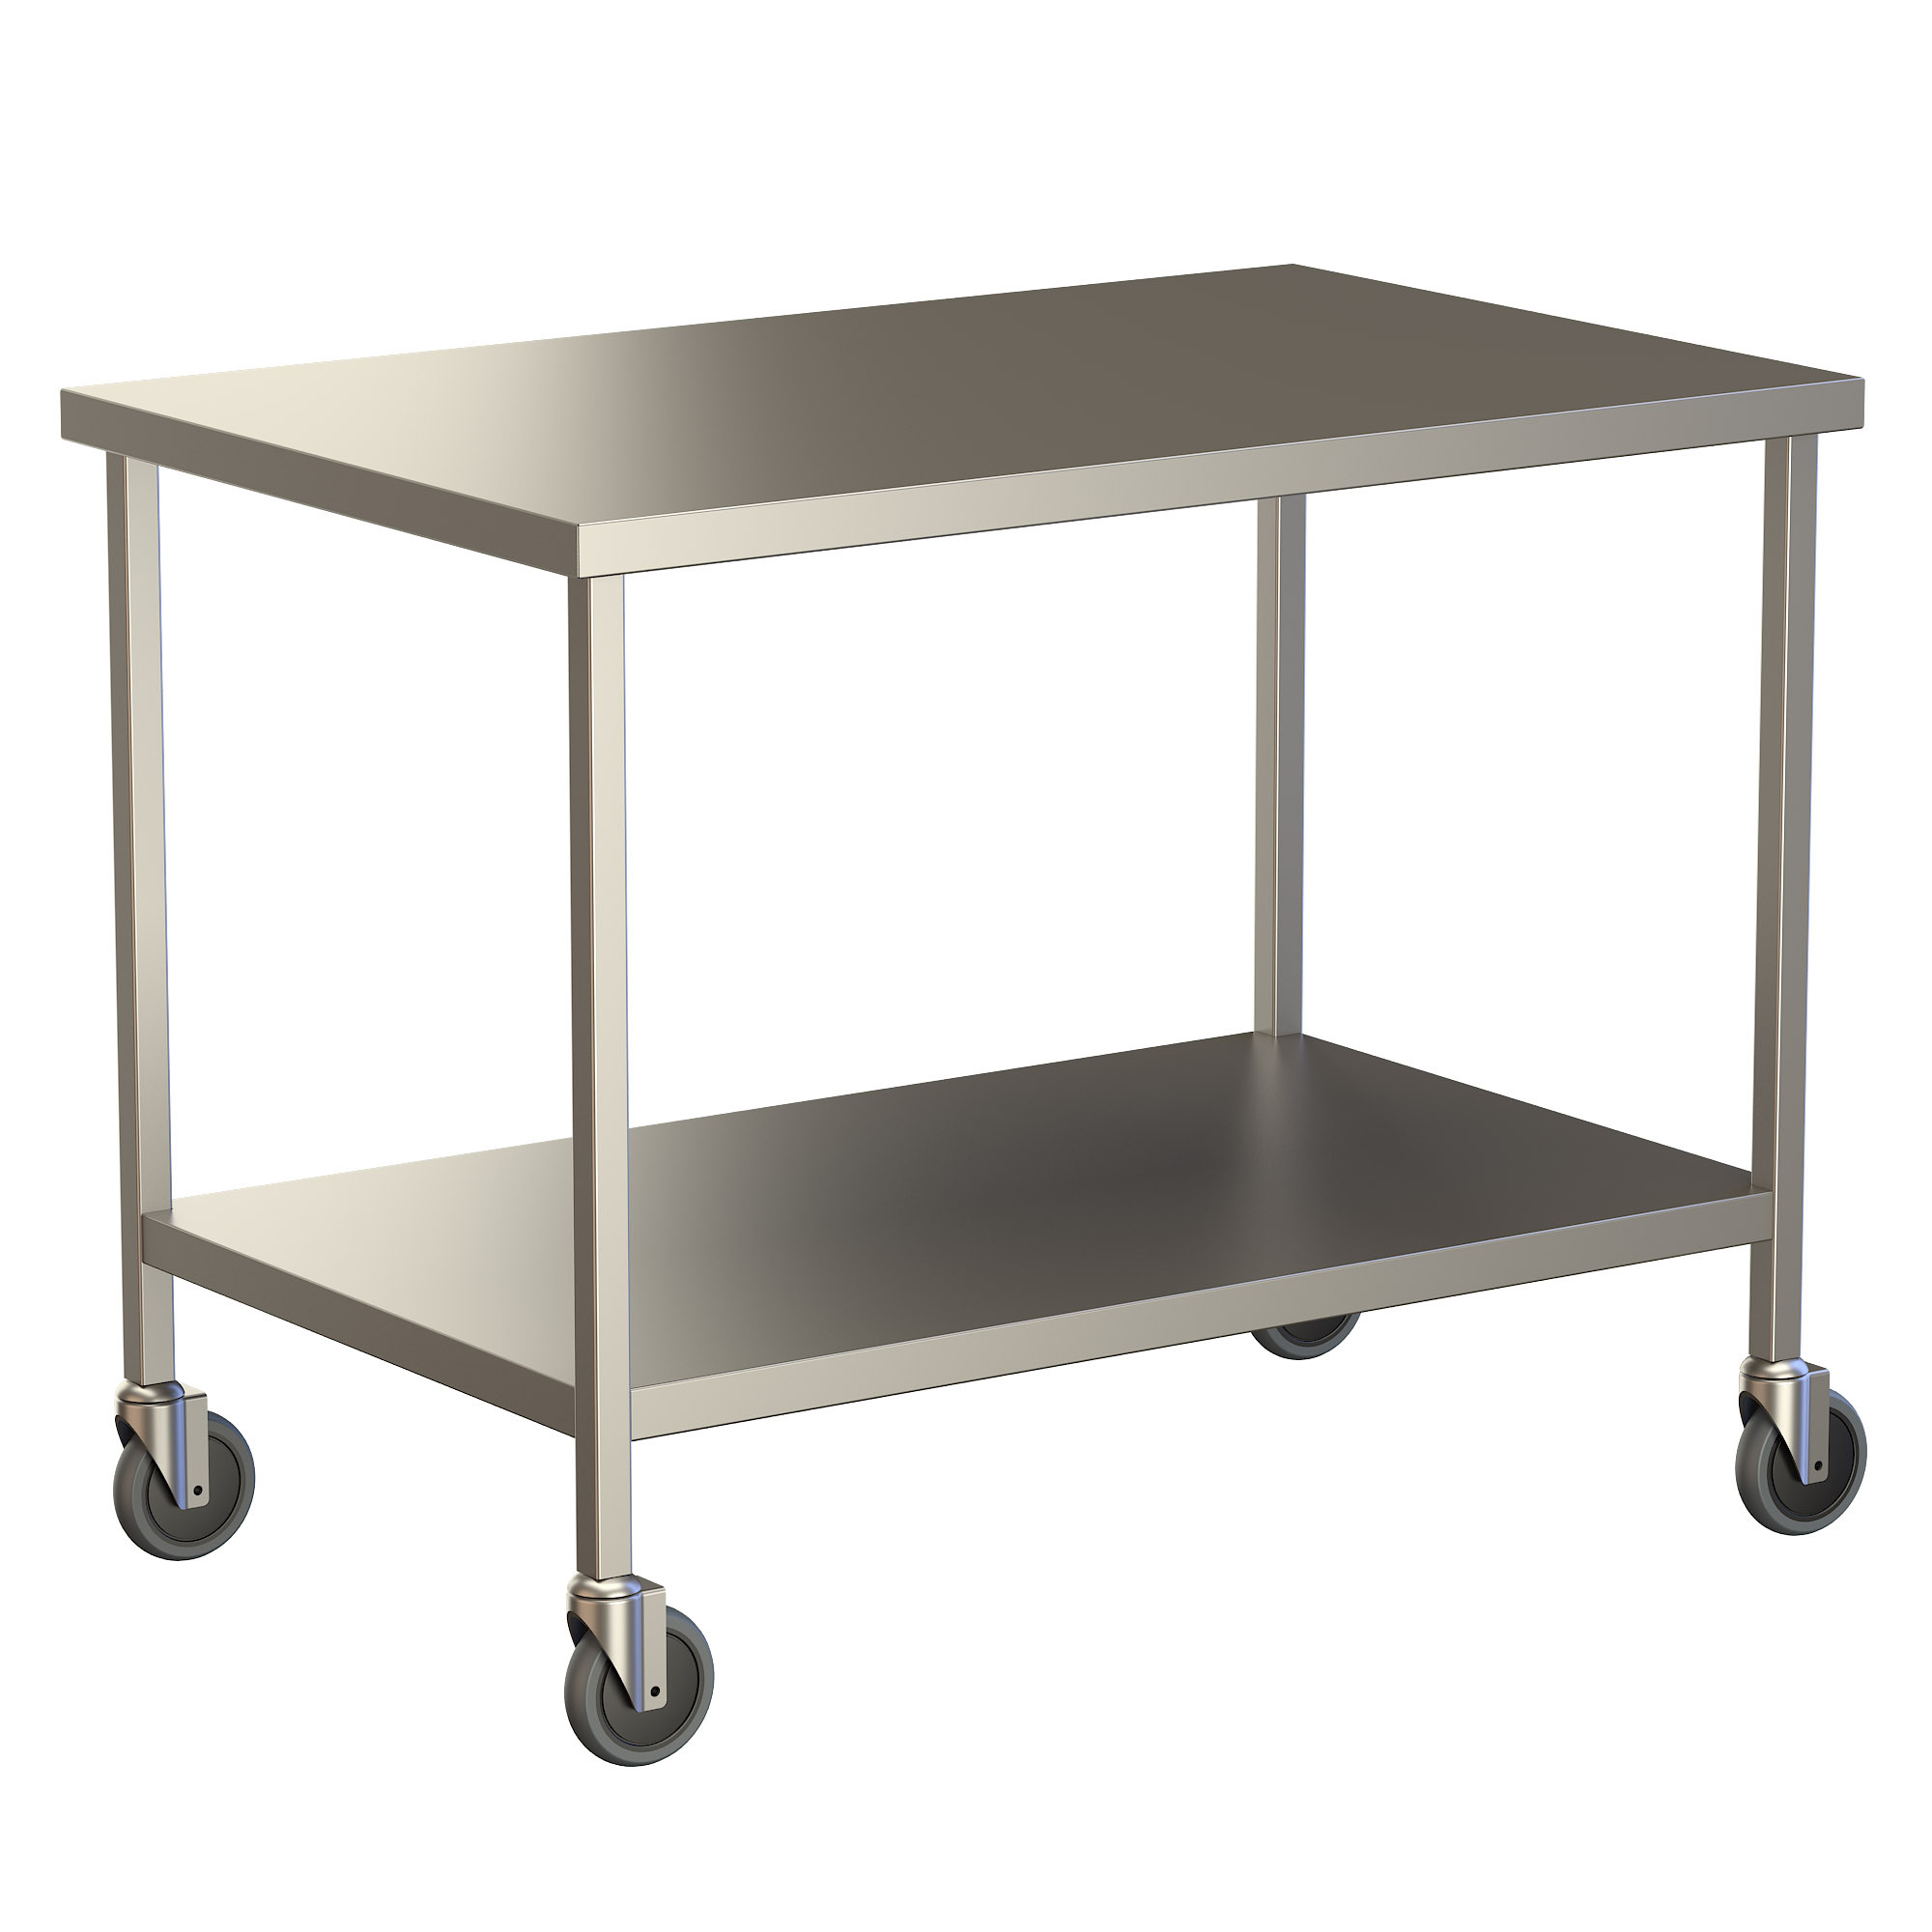 Preparation Table | Stainless Steel Table